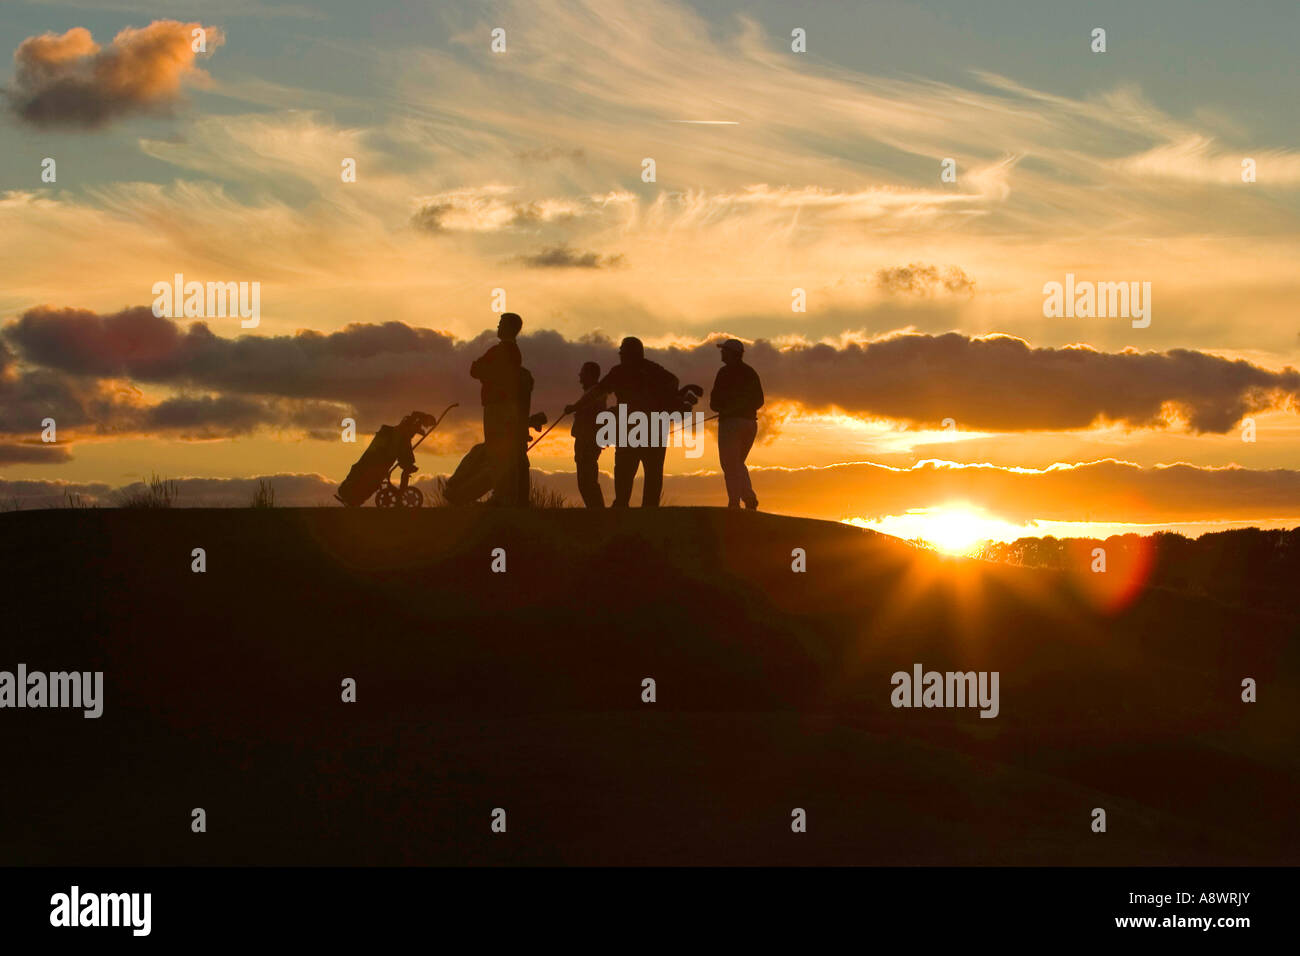 The last hole of the day. Five golfers stand on the last tee as the sun sets. Stock Photo